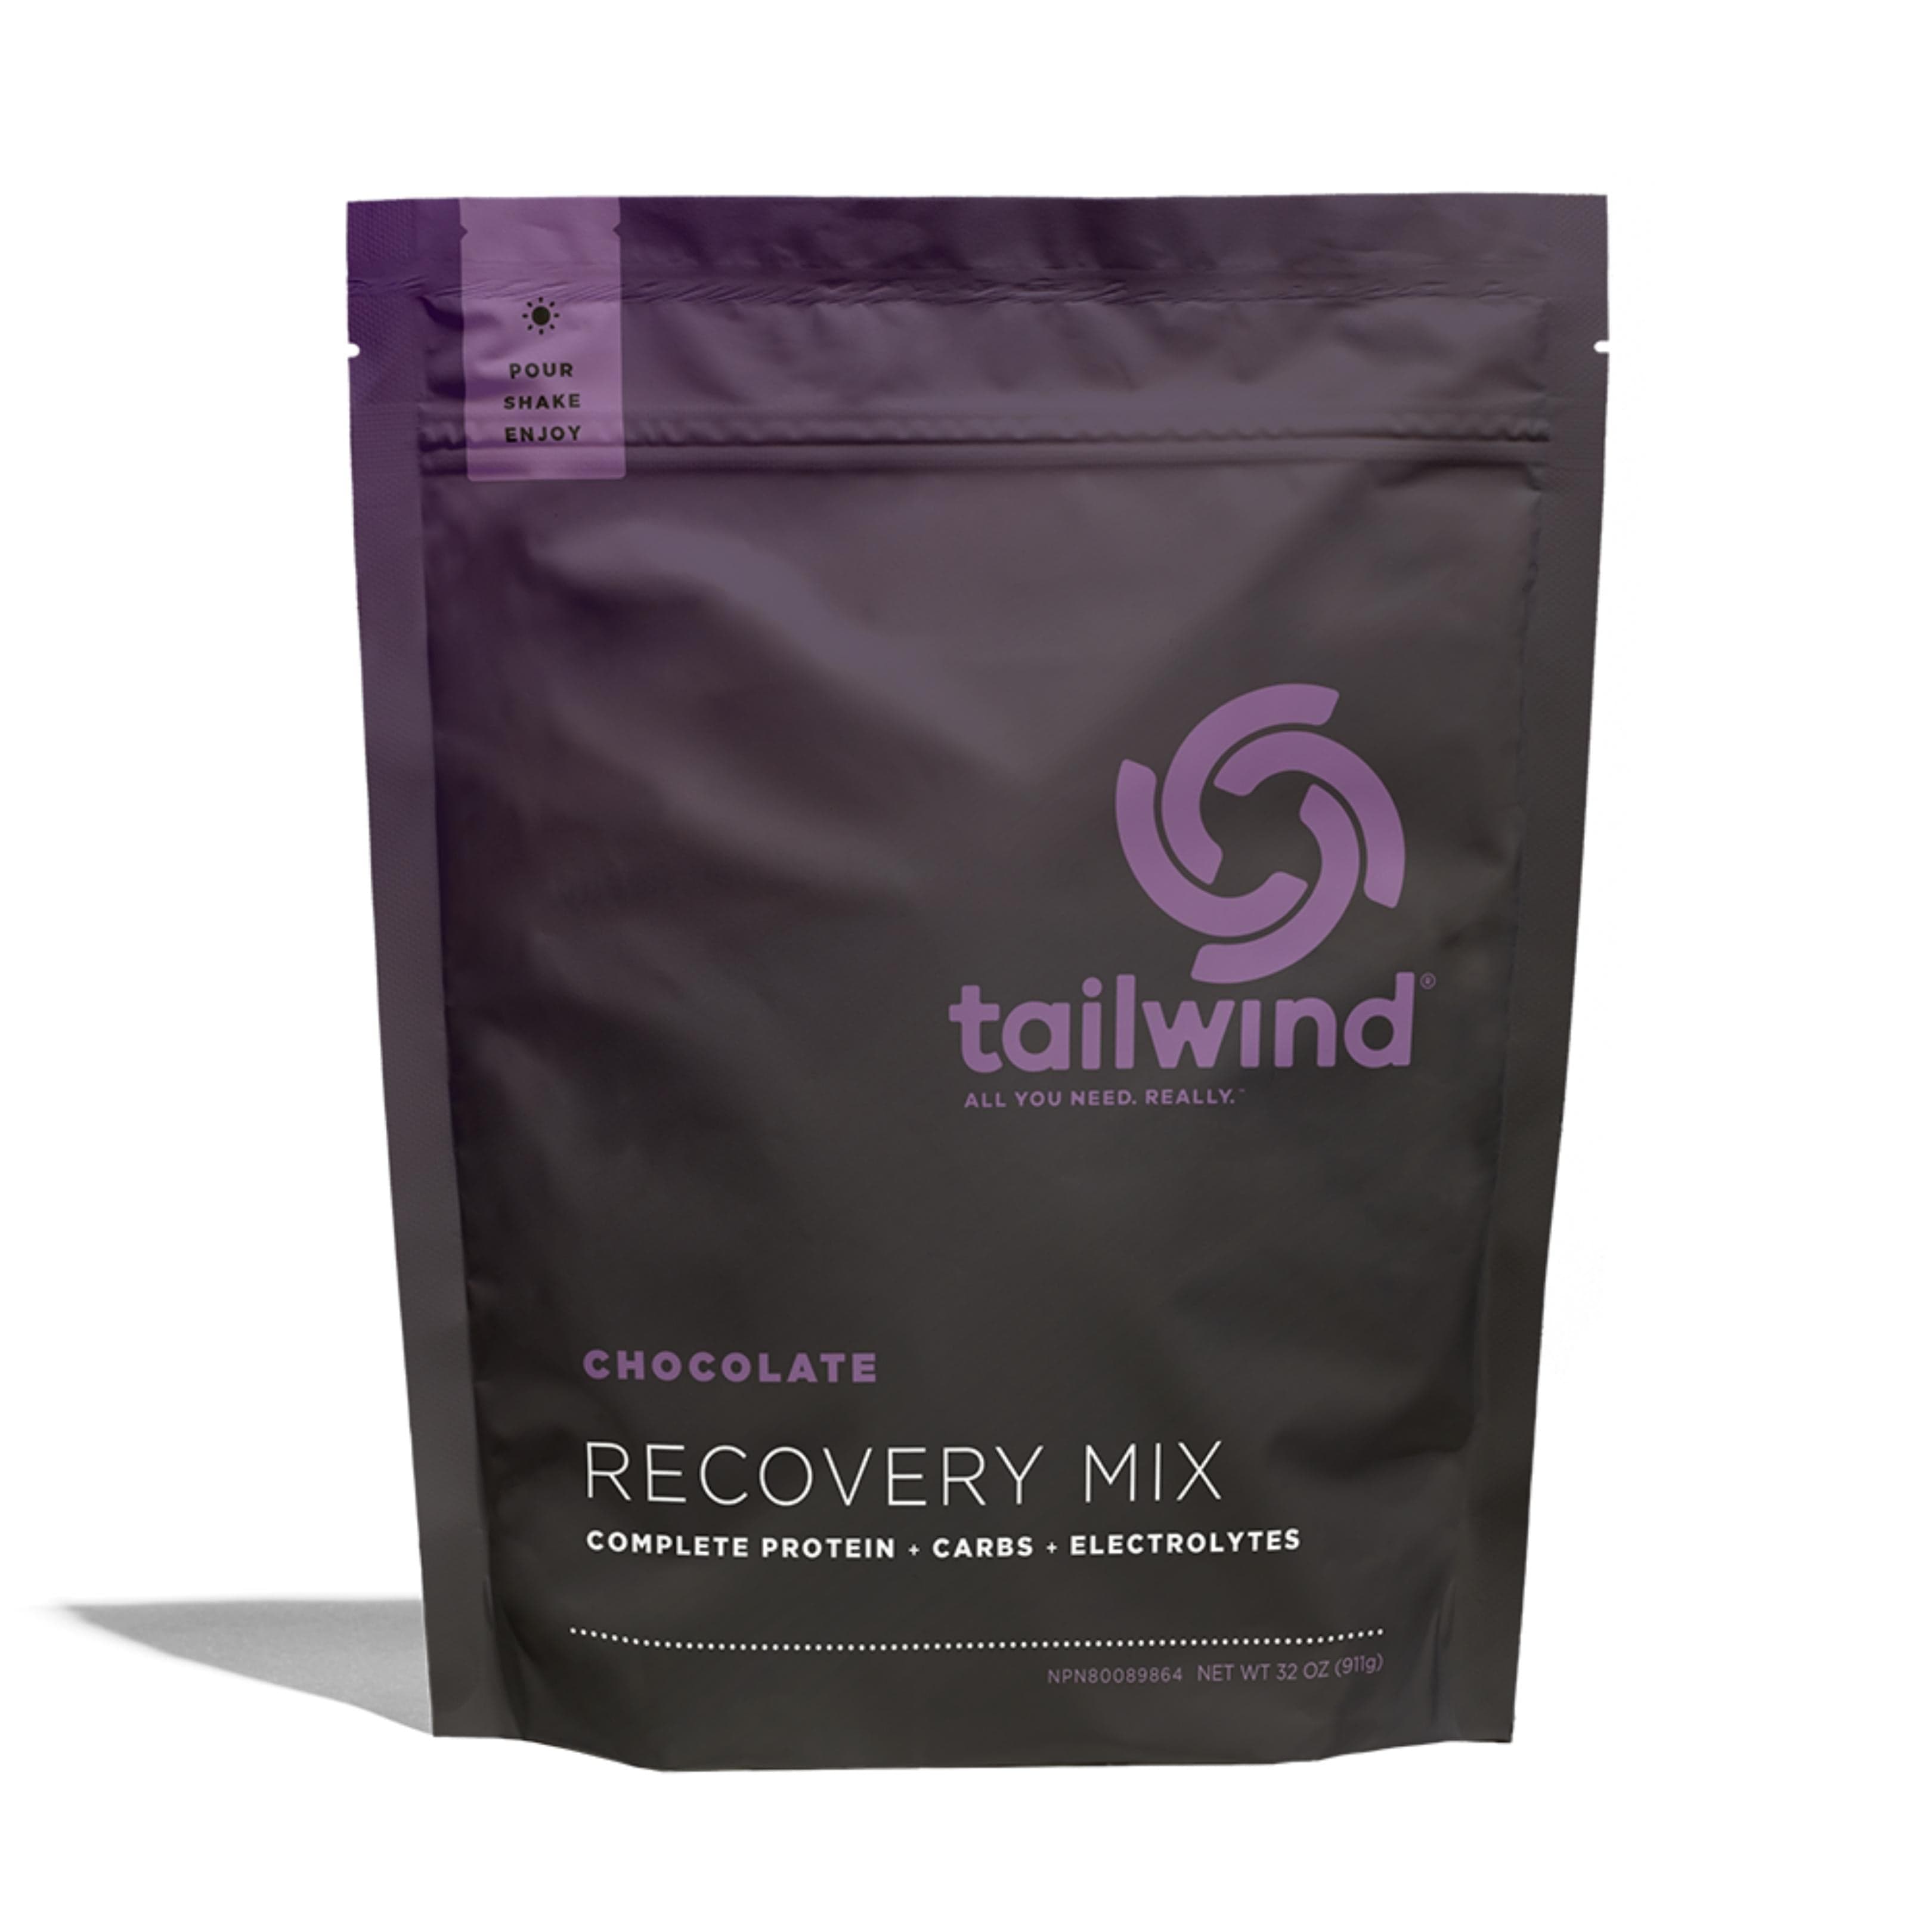 tailwind Nutrition Supplement Medium (30 serve) / Chocolate Rebuild Recovery Drink Mix 8 55283 00540 8